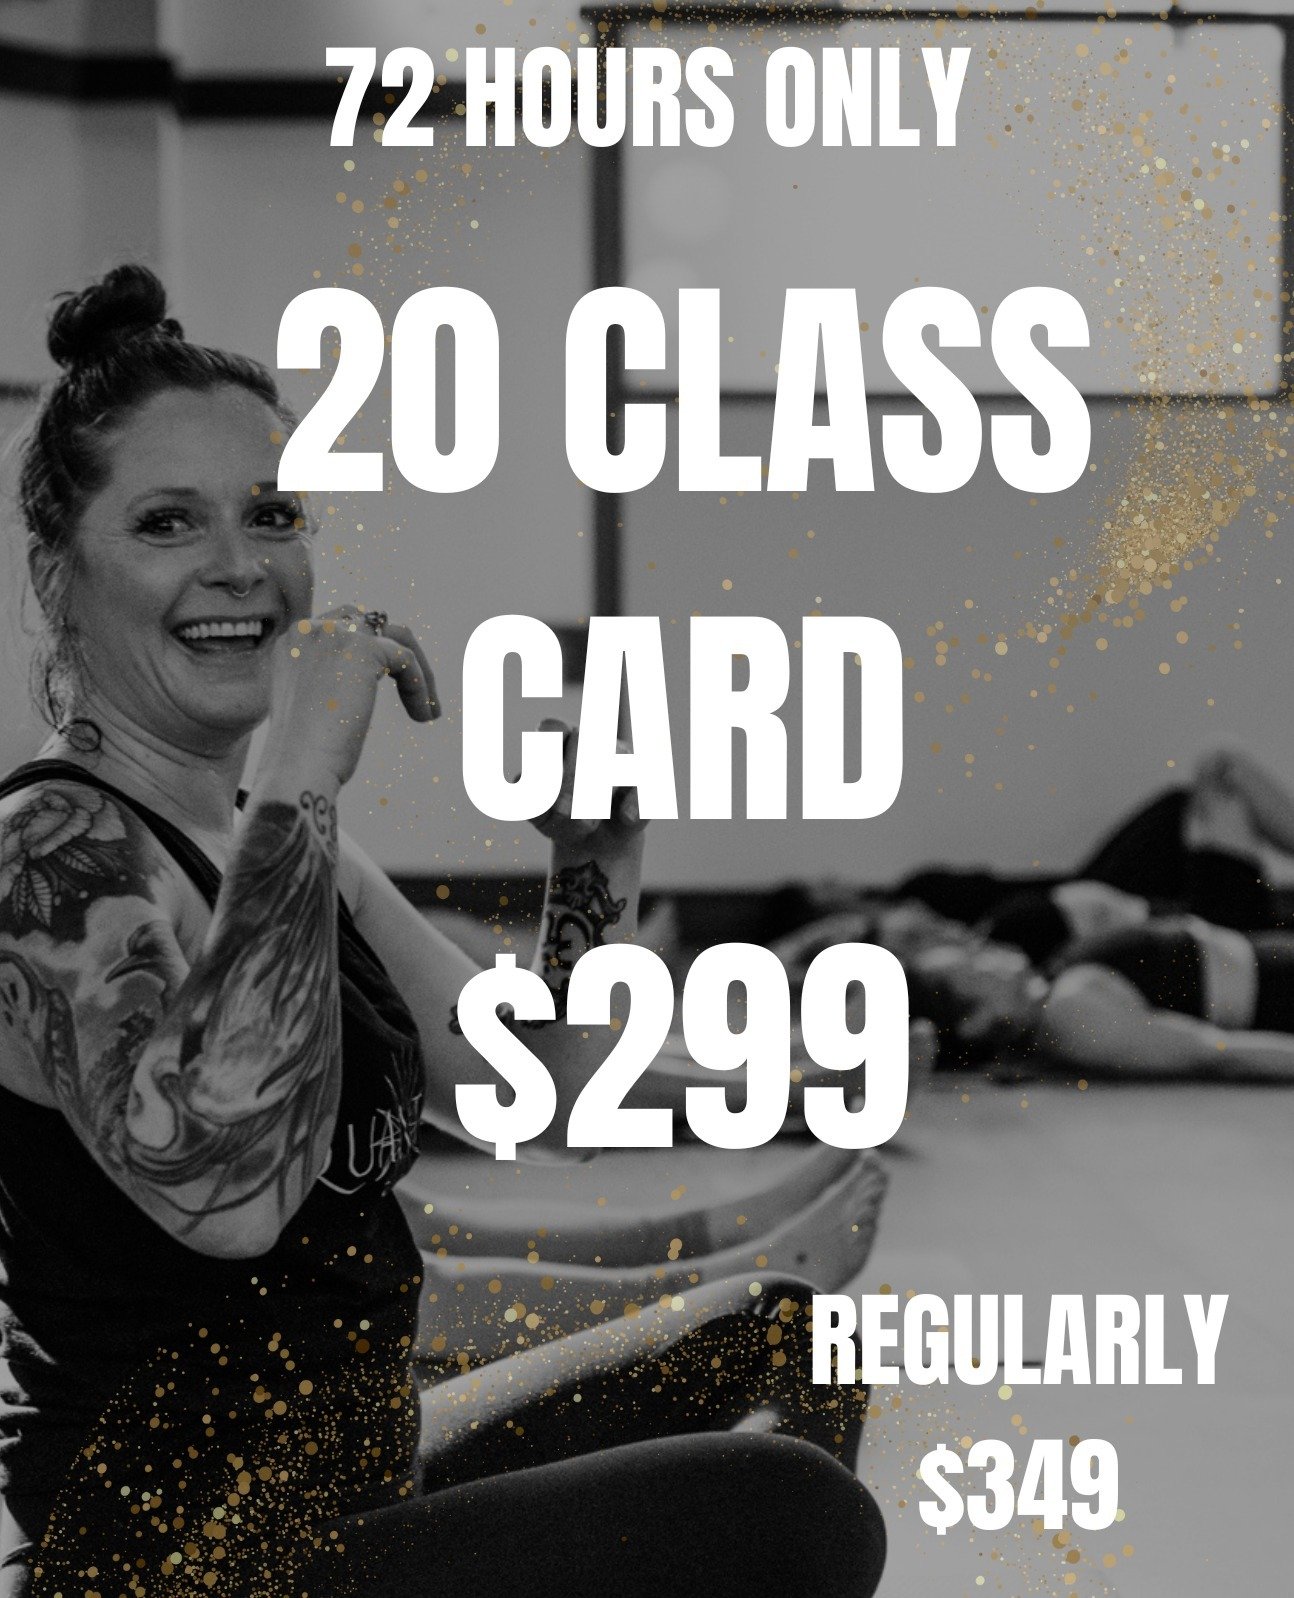 Flash Sale! Now through midnight on Monday, April 29, stock up on our rarely available 20 class cards for only $299! ⁠
⁠
Class cards never expire. ⁠
⁠
Available on our website or in studio!⁠
⁠
*Reformer classes priced separately*